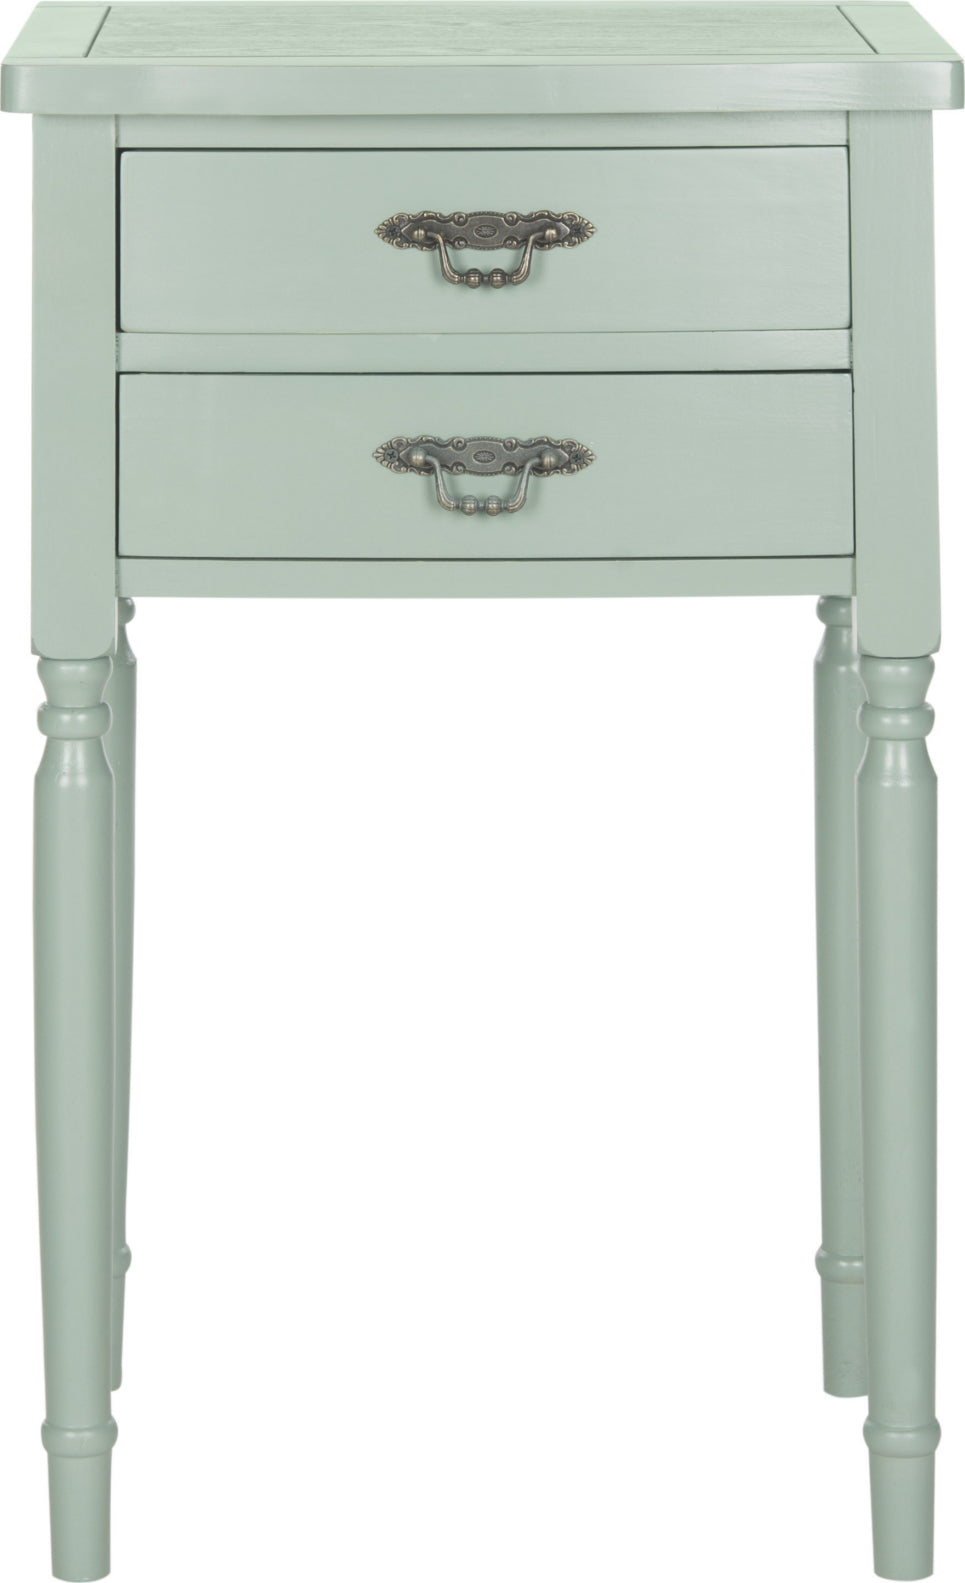 Safavieh Marilyn End Table With Storage Drawers Dusty Green Furniture main image